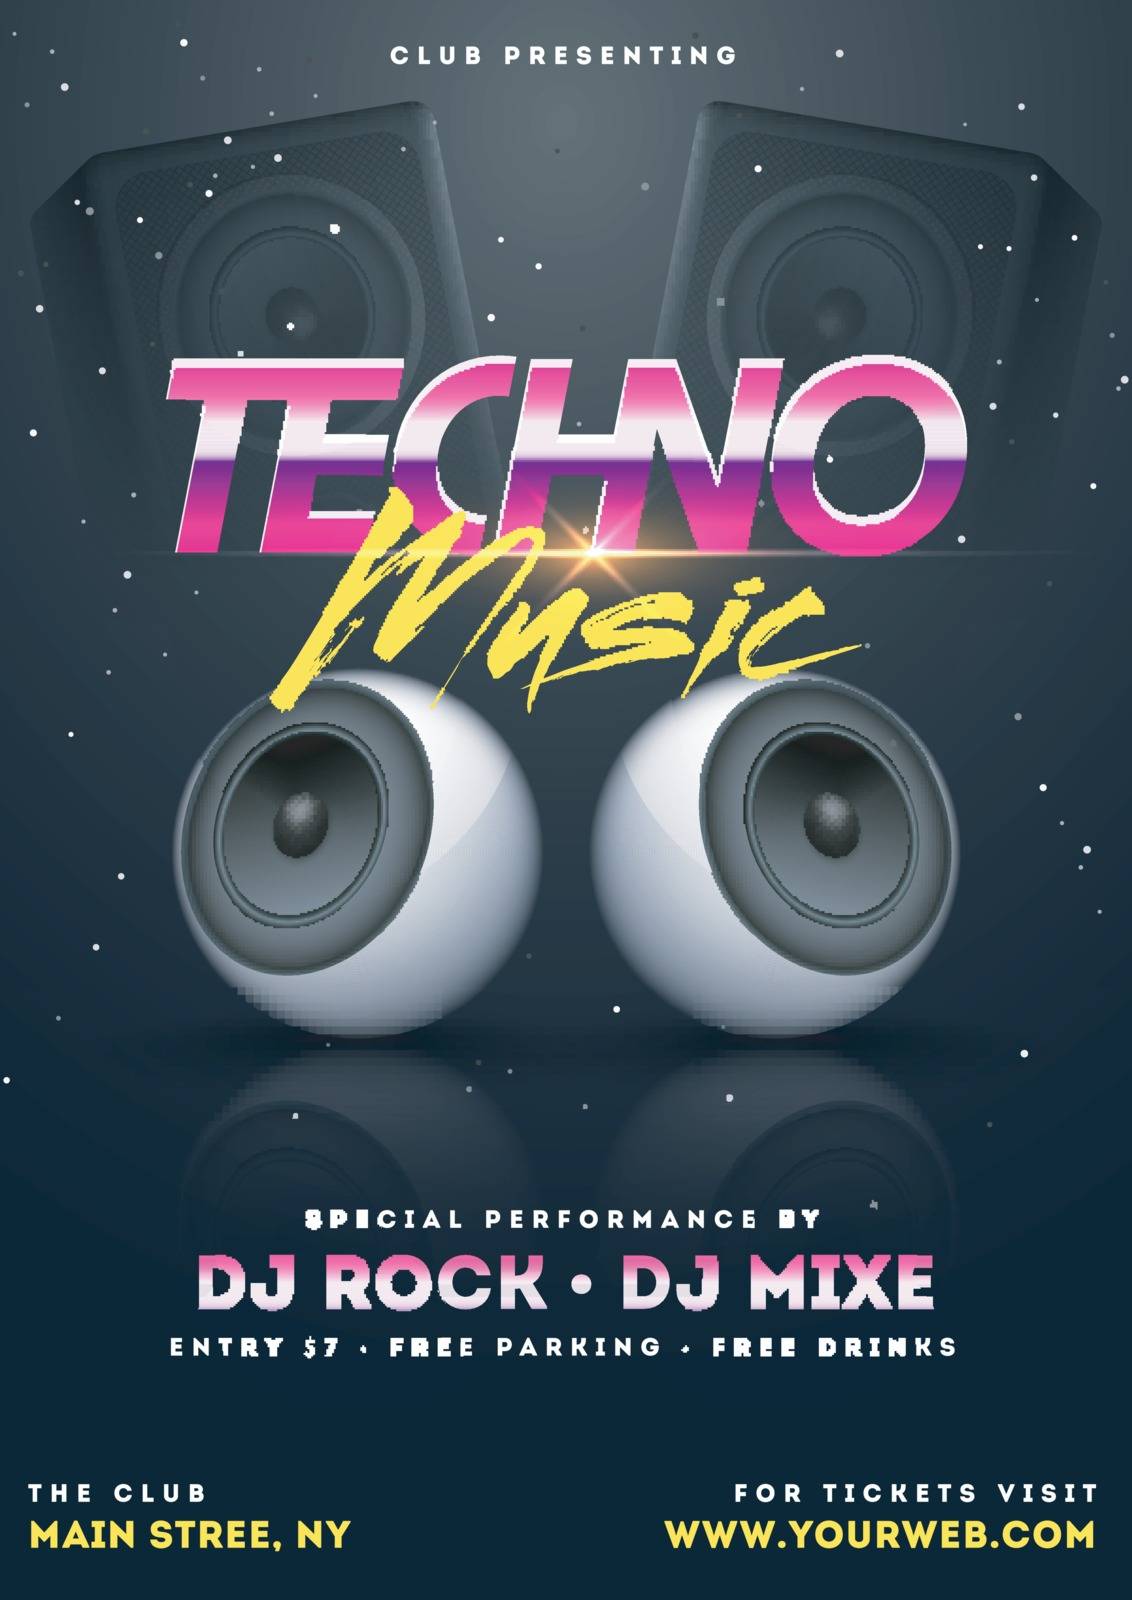 Techno music party template with illustration of realistic speakers.